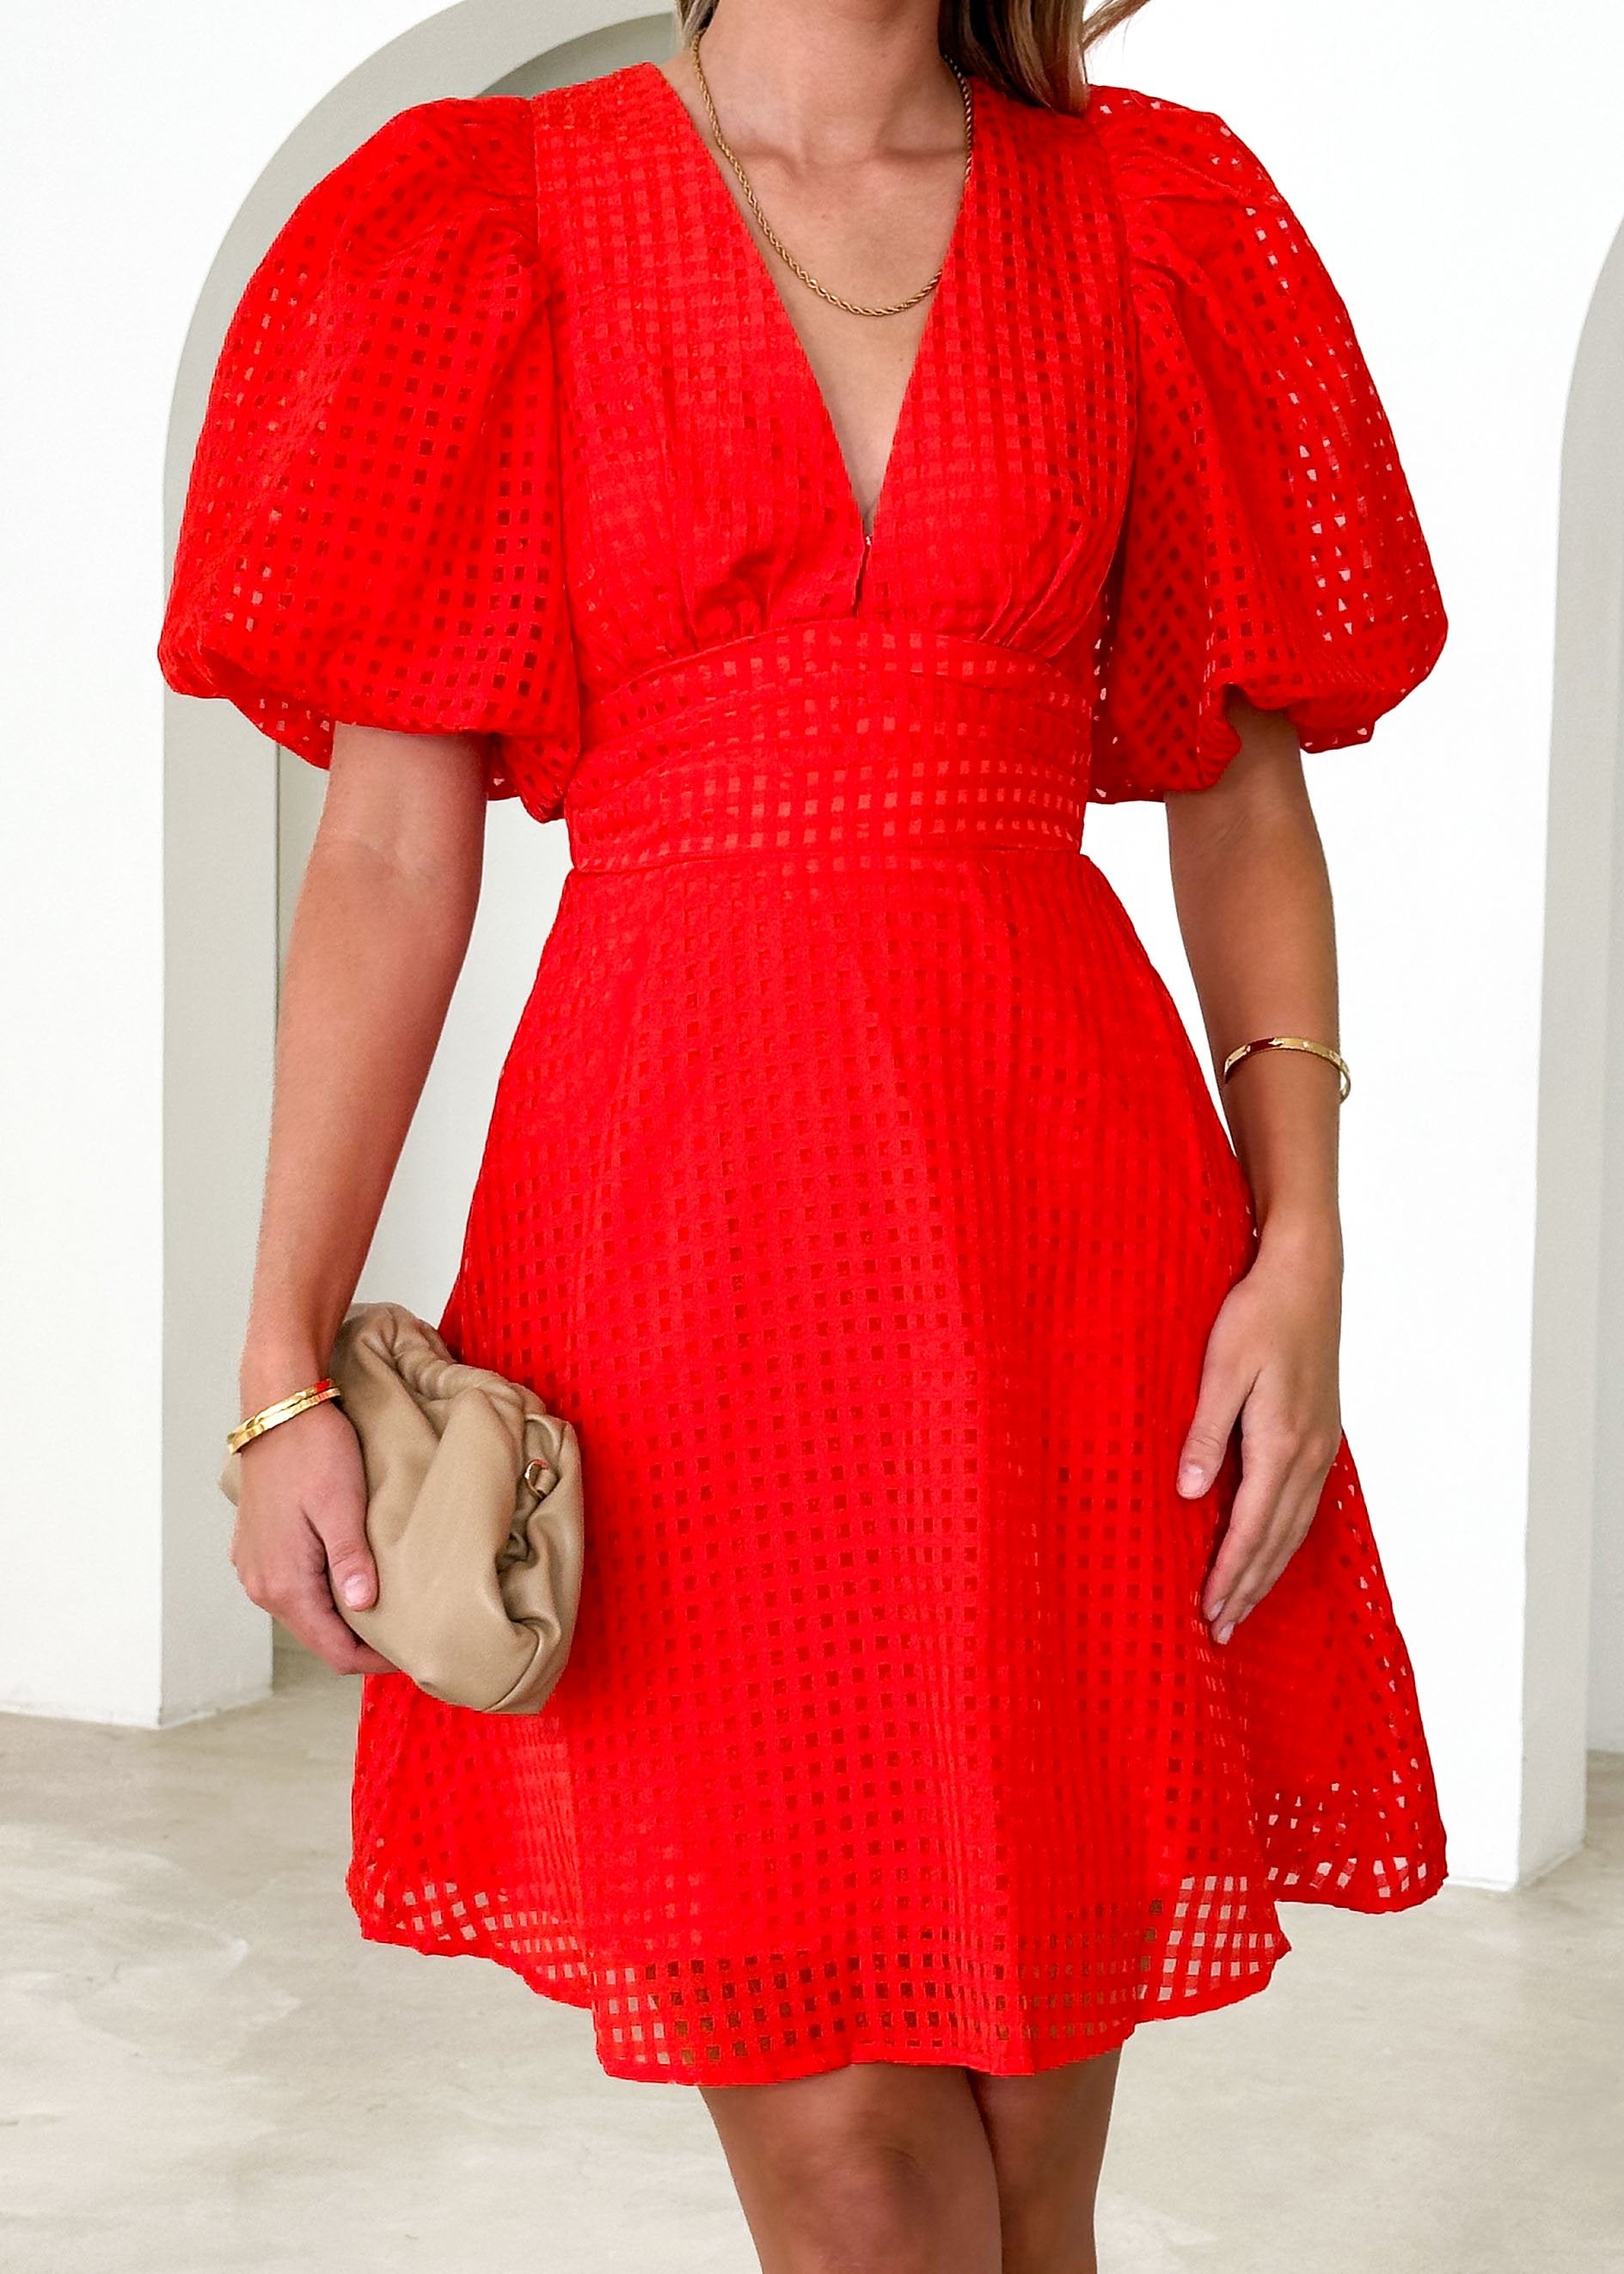 Yearcha Dress - Red